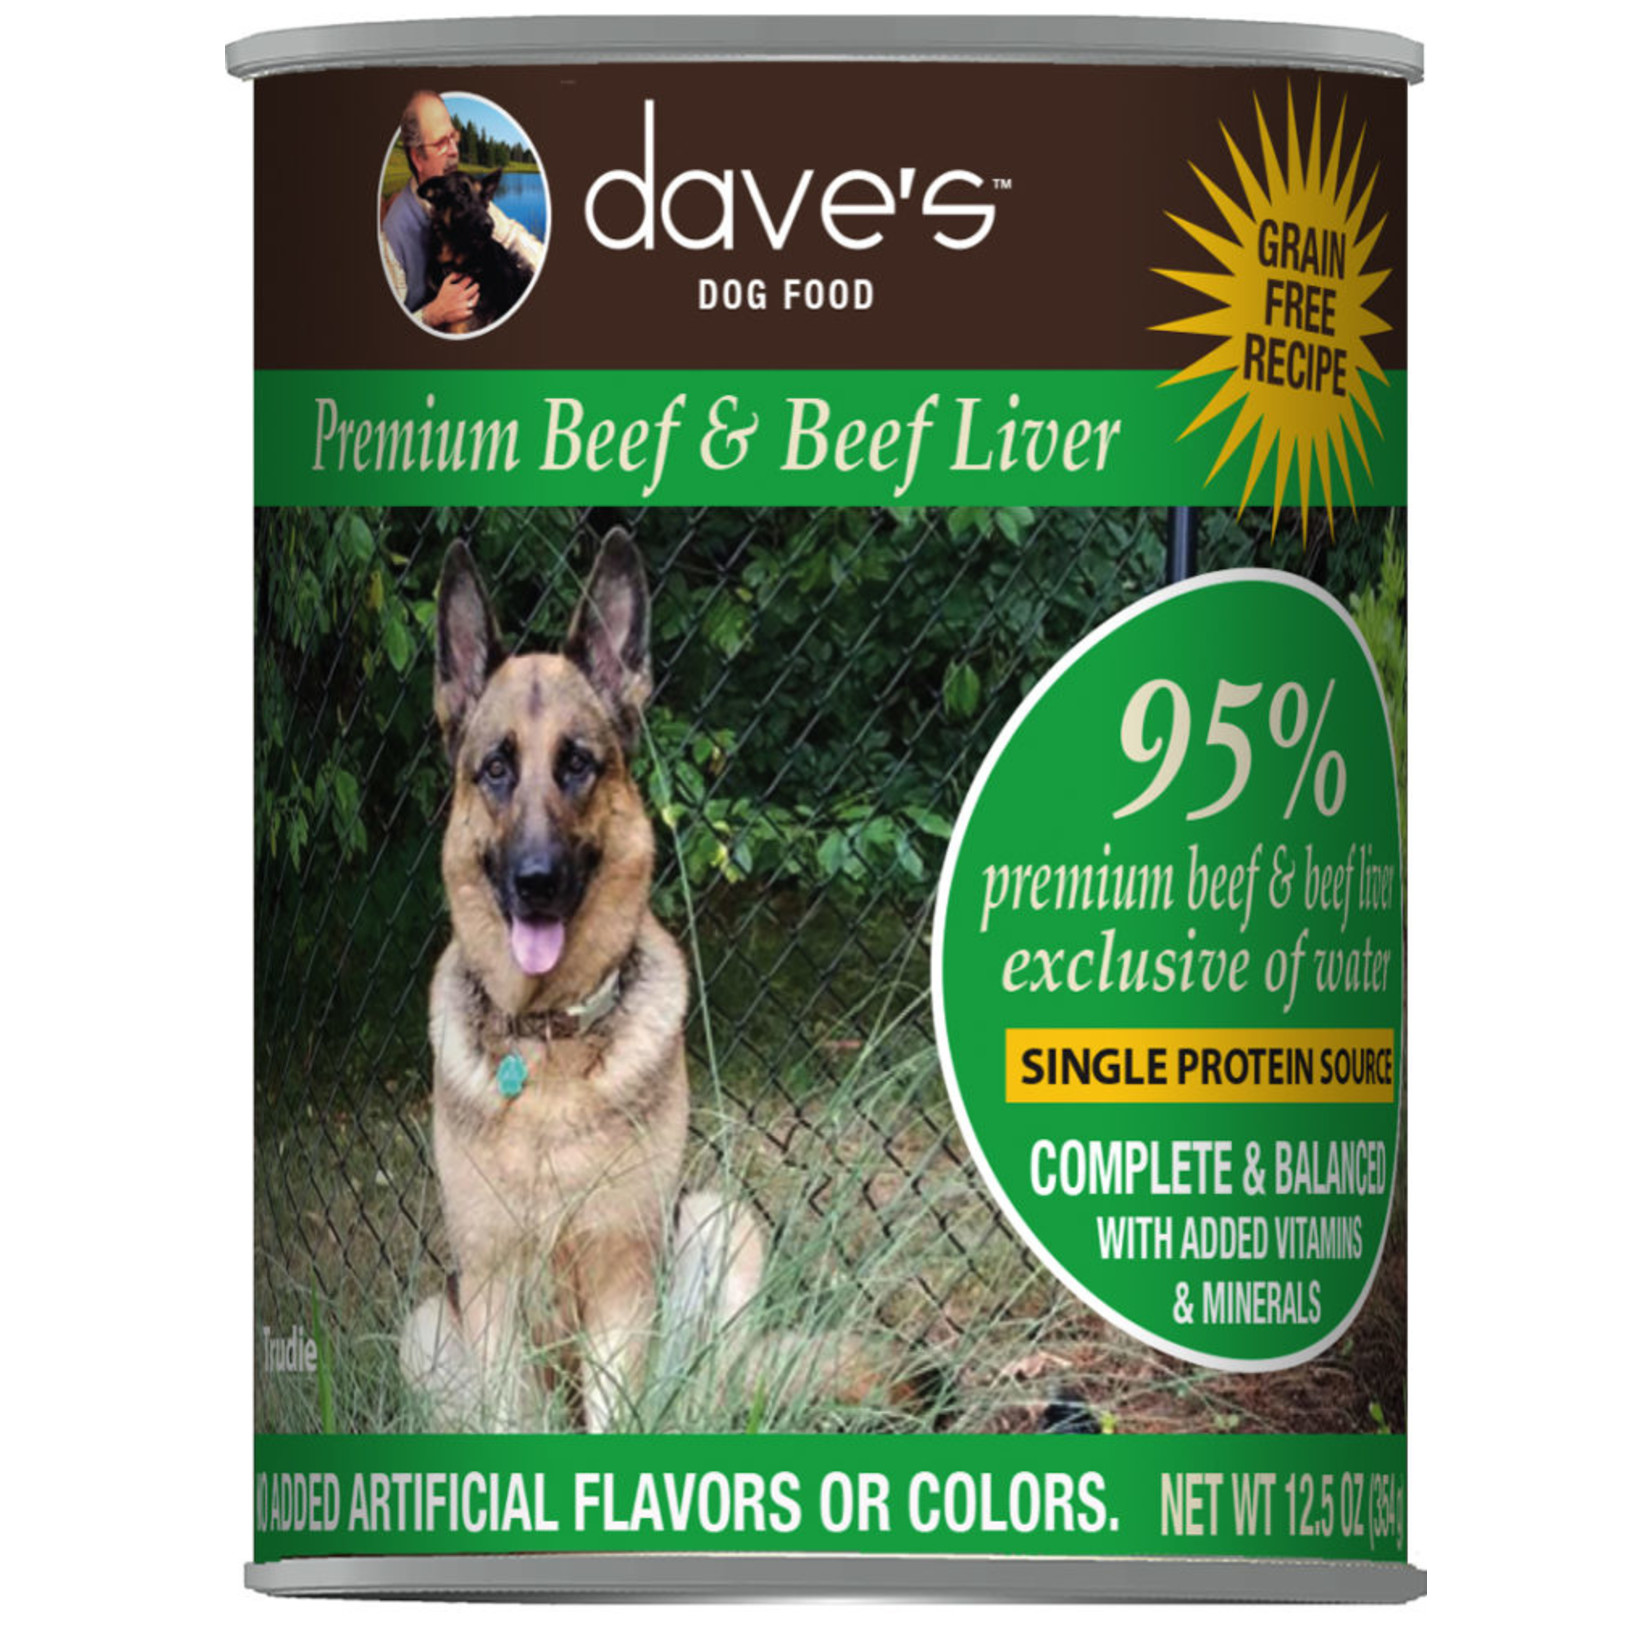 Daves Pet Food Dave's Wet Dog Food 95% Premium Beef & Beef Liver 12.5oz Can Grain Free